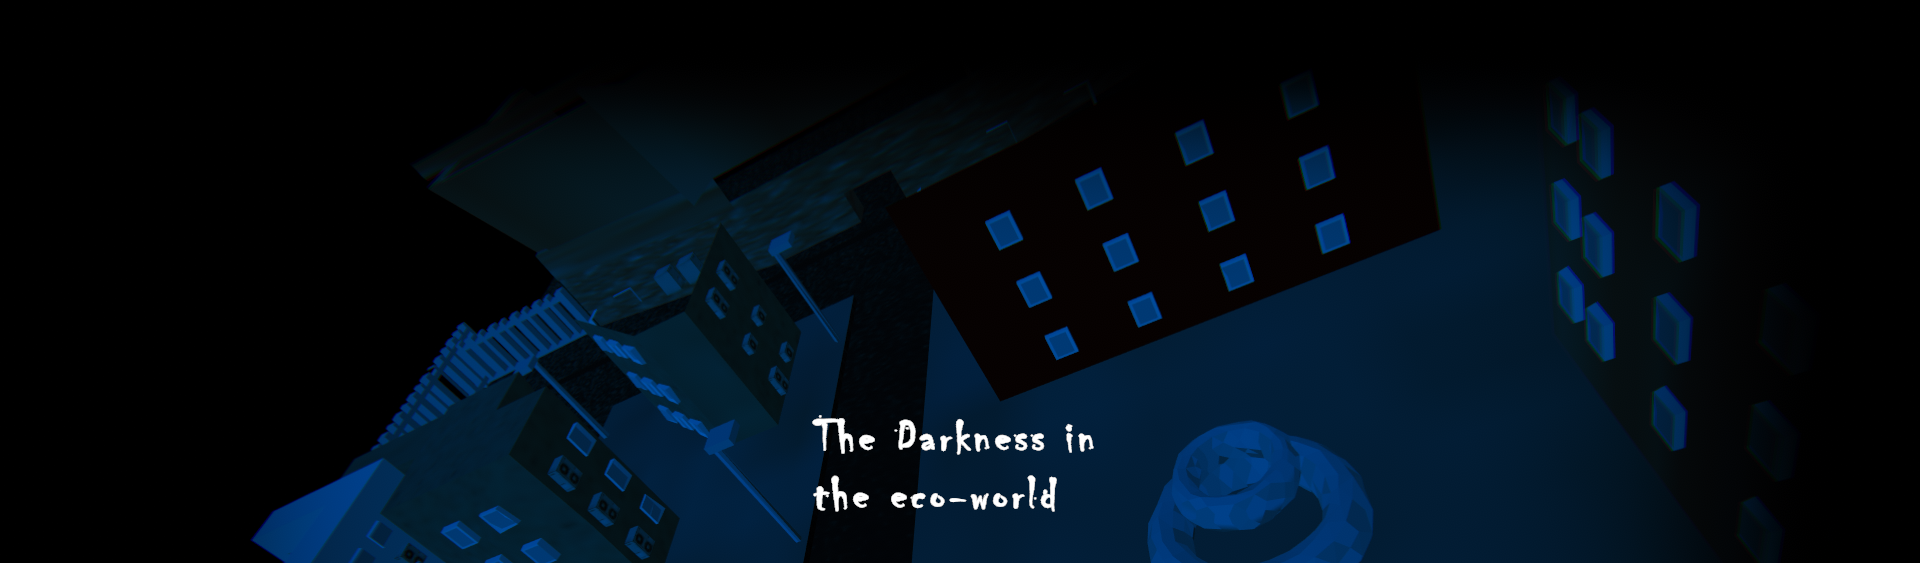 The Darkness of the eco world